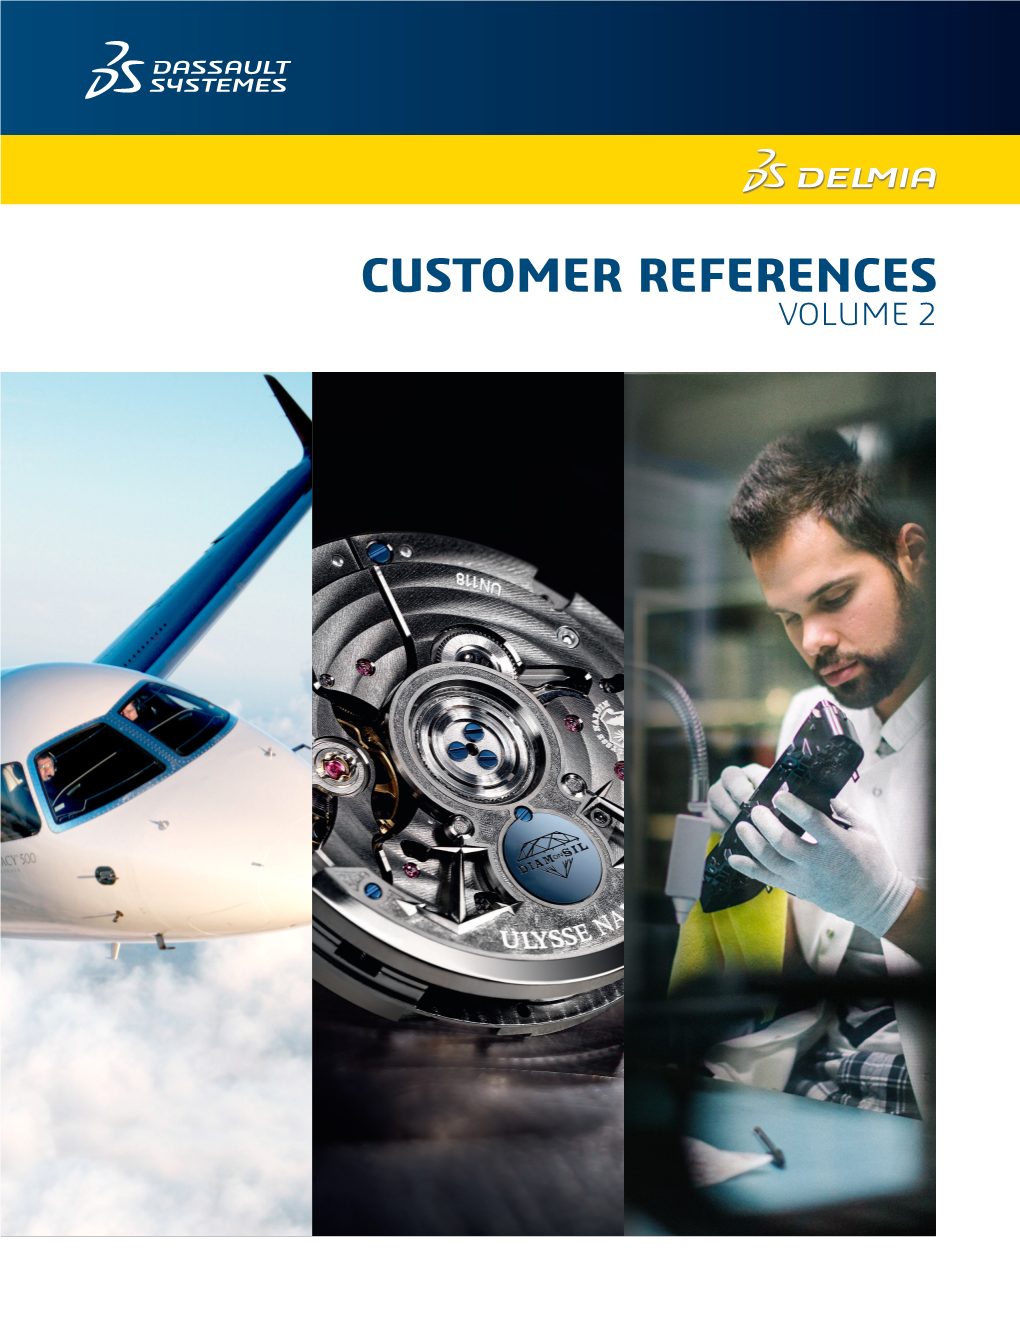 Customer References Volume 2 Table of Contents